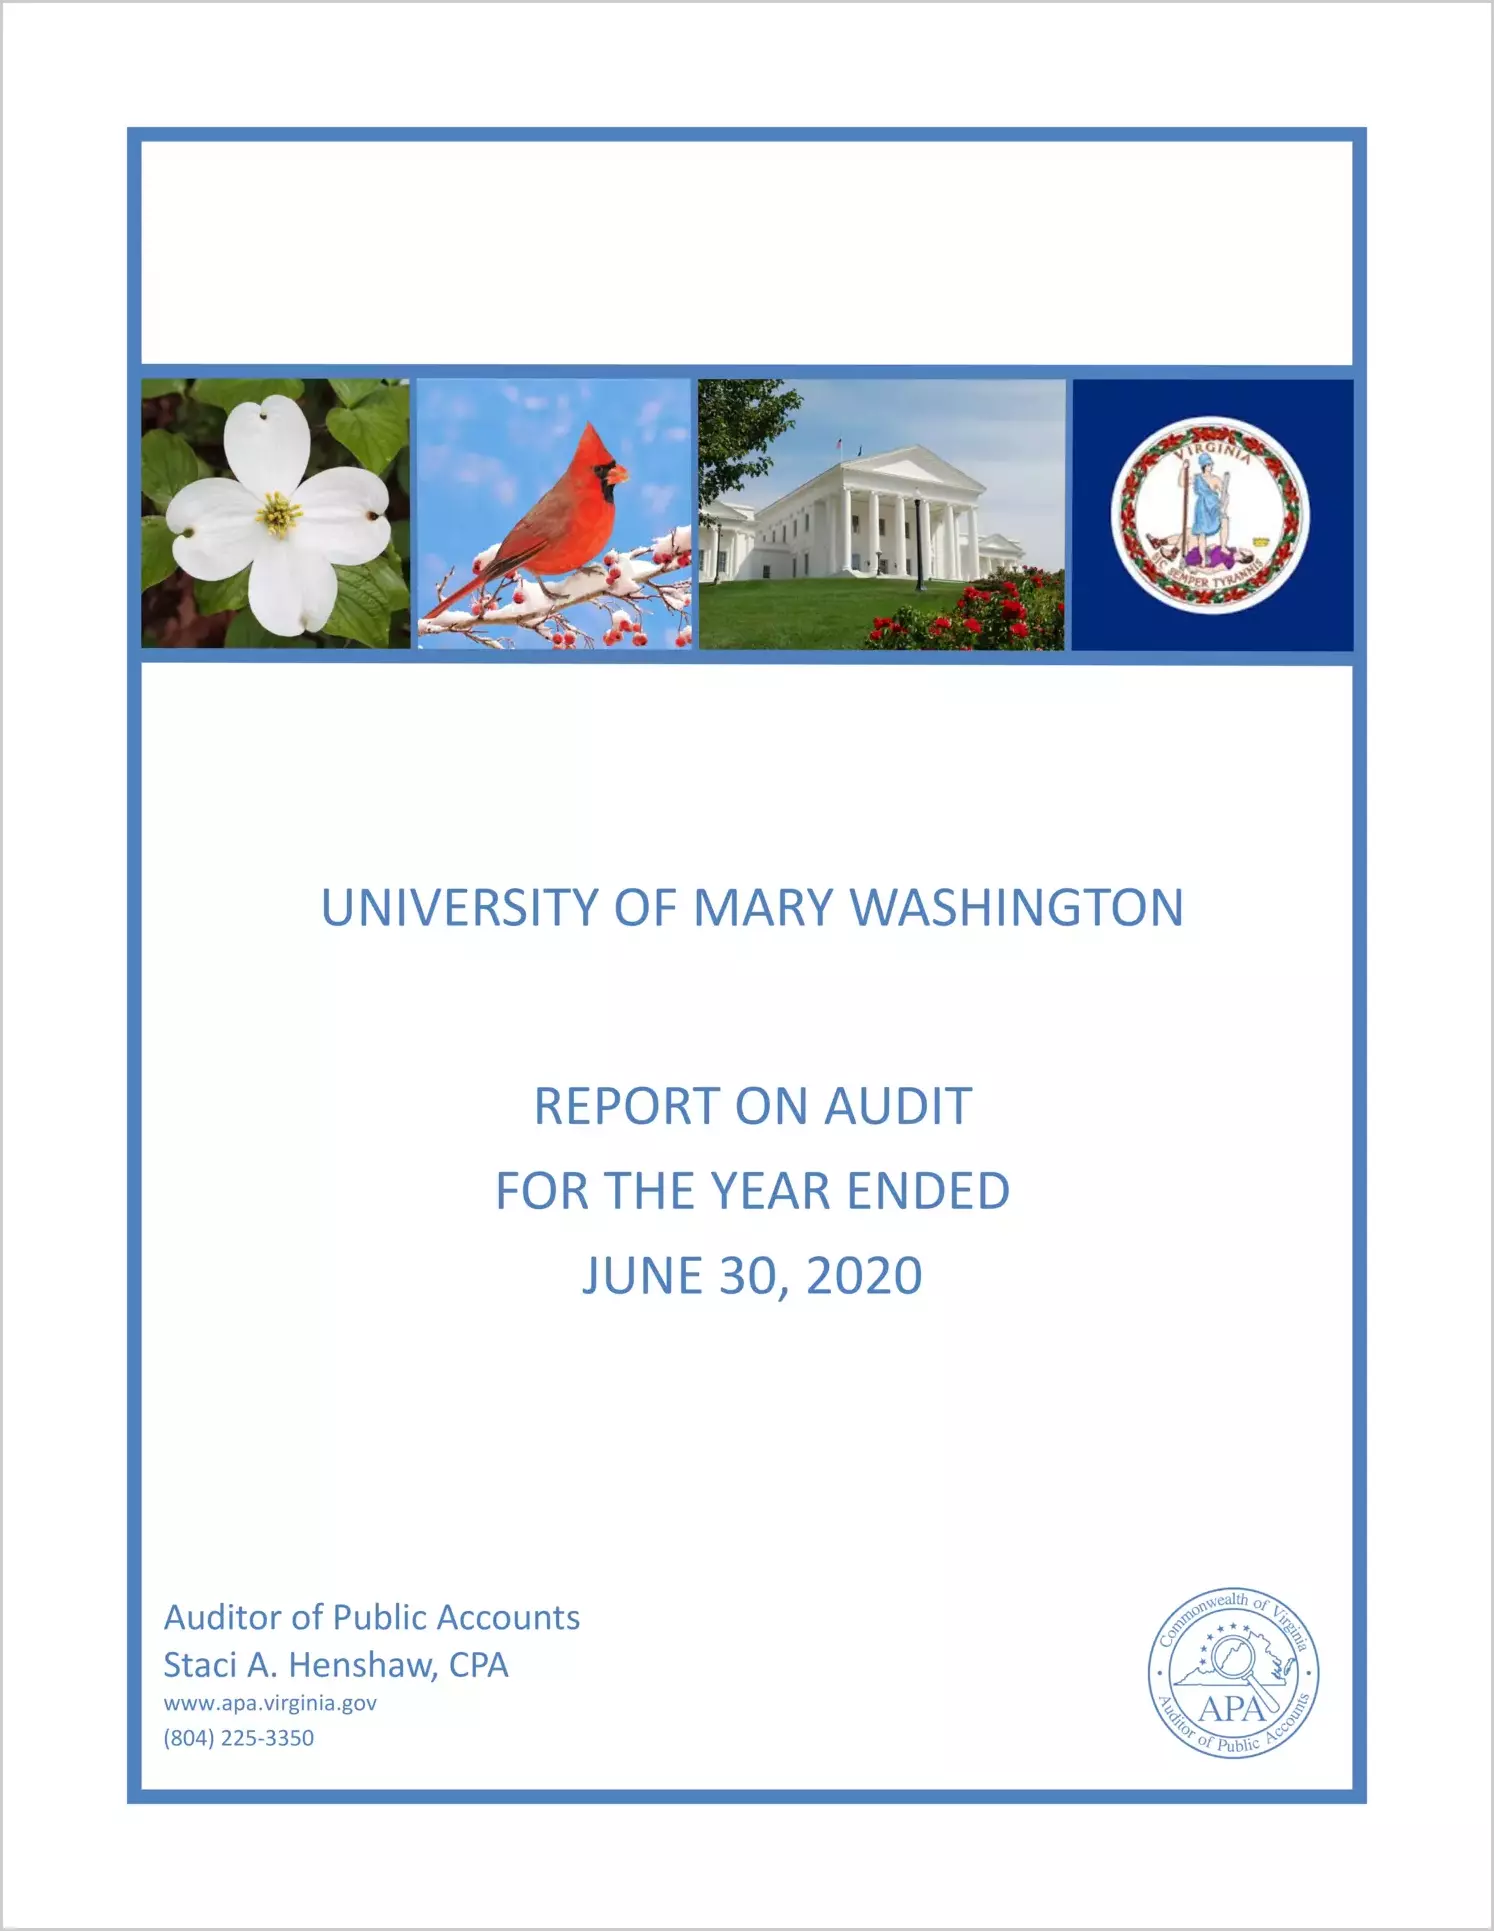 University of Mary Washington for the year ended June 30, 2020